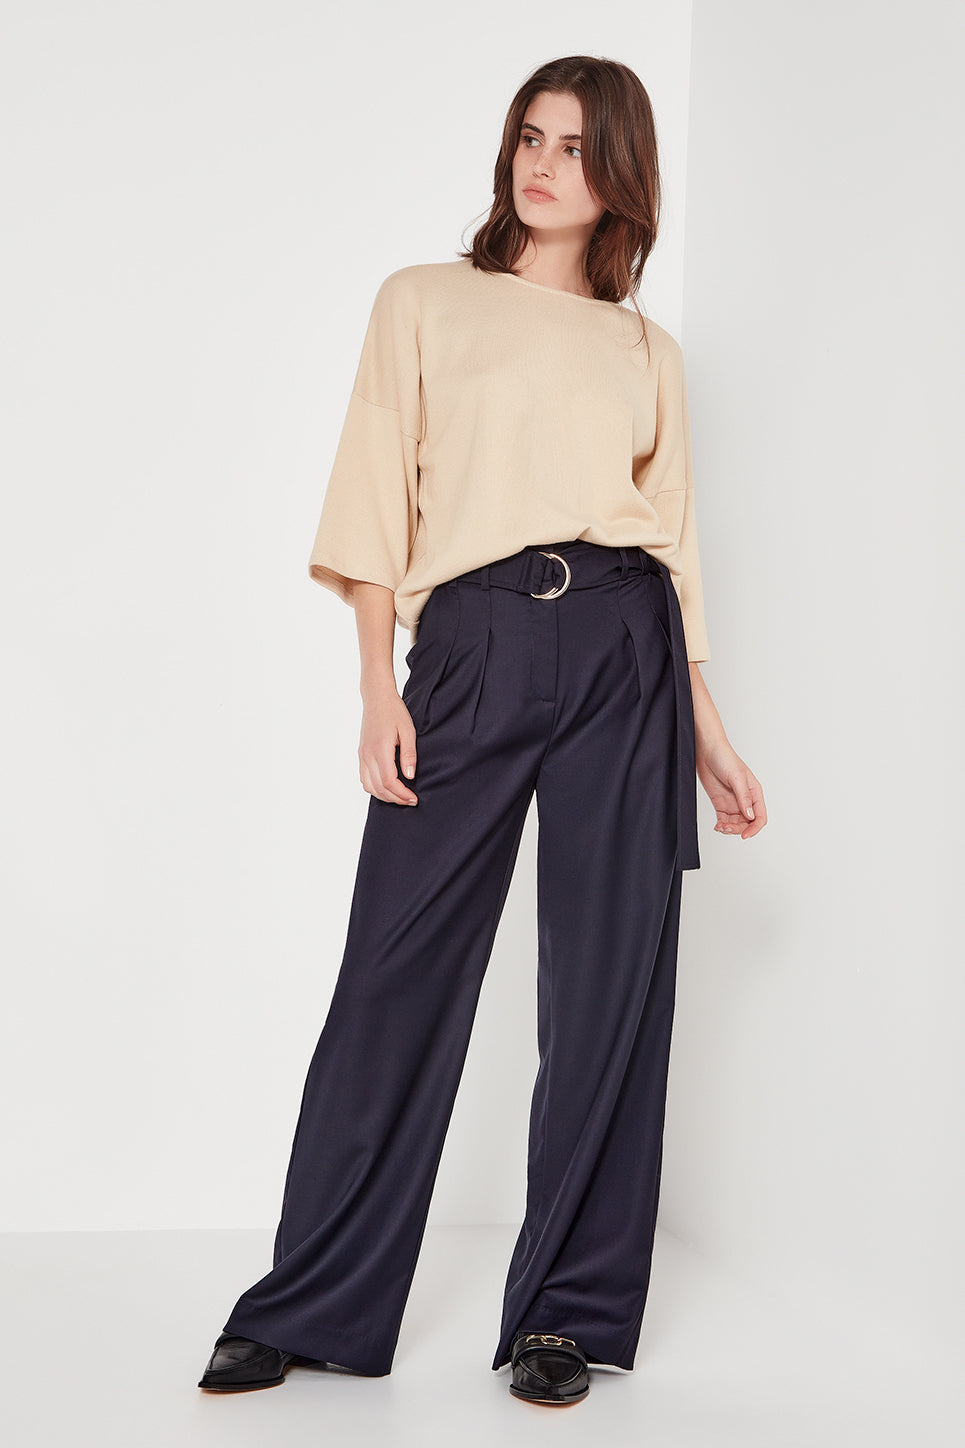 The Asher Trouser in Navy